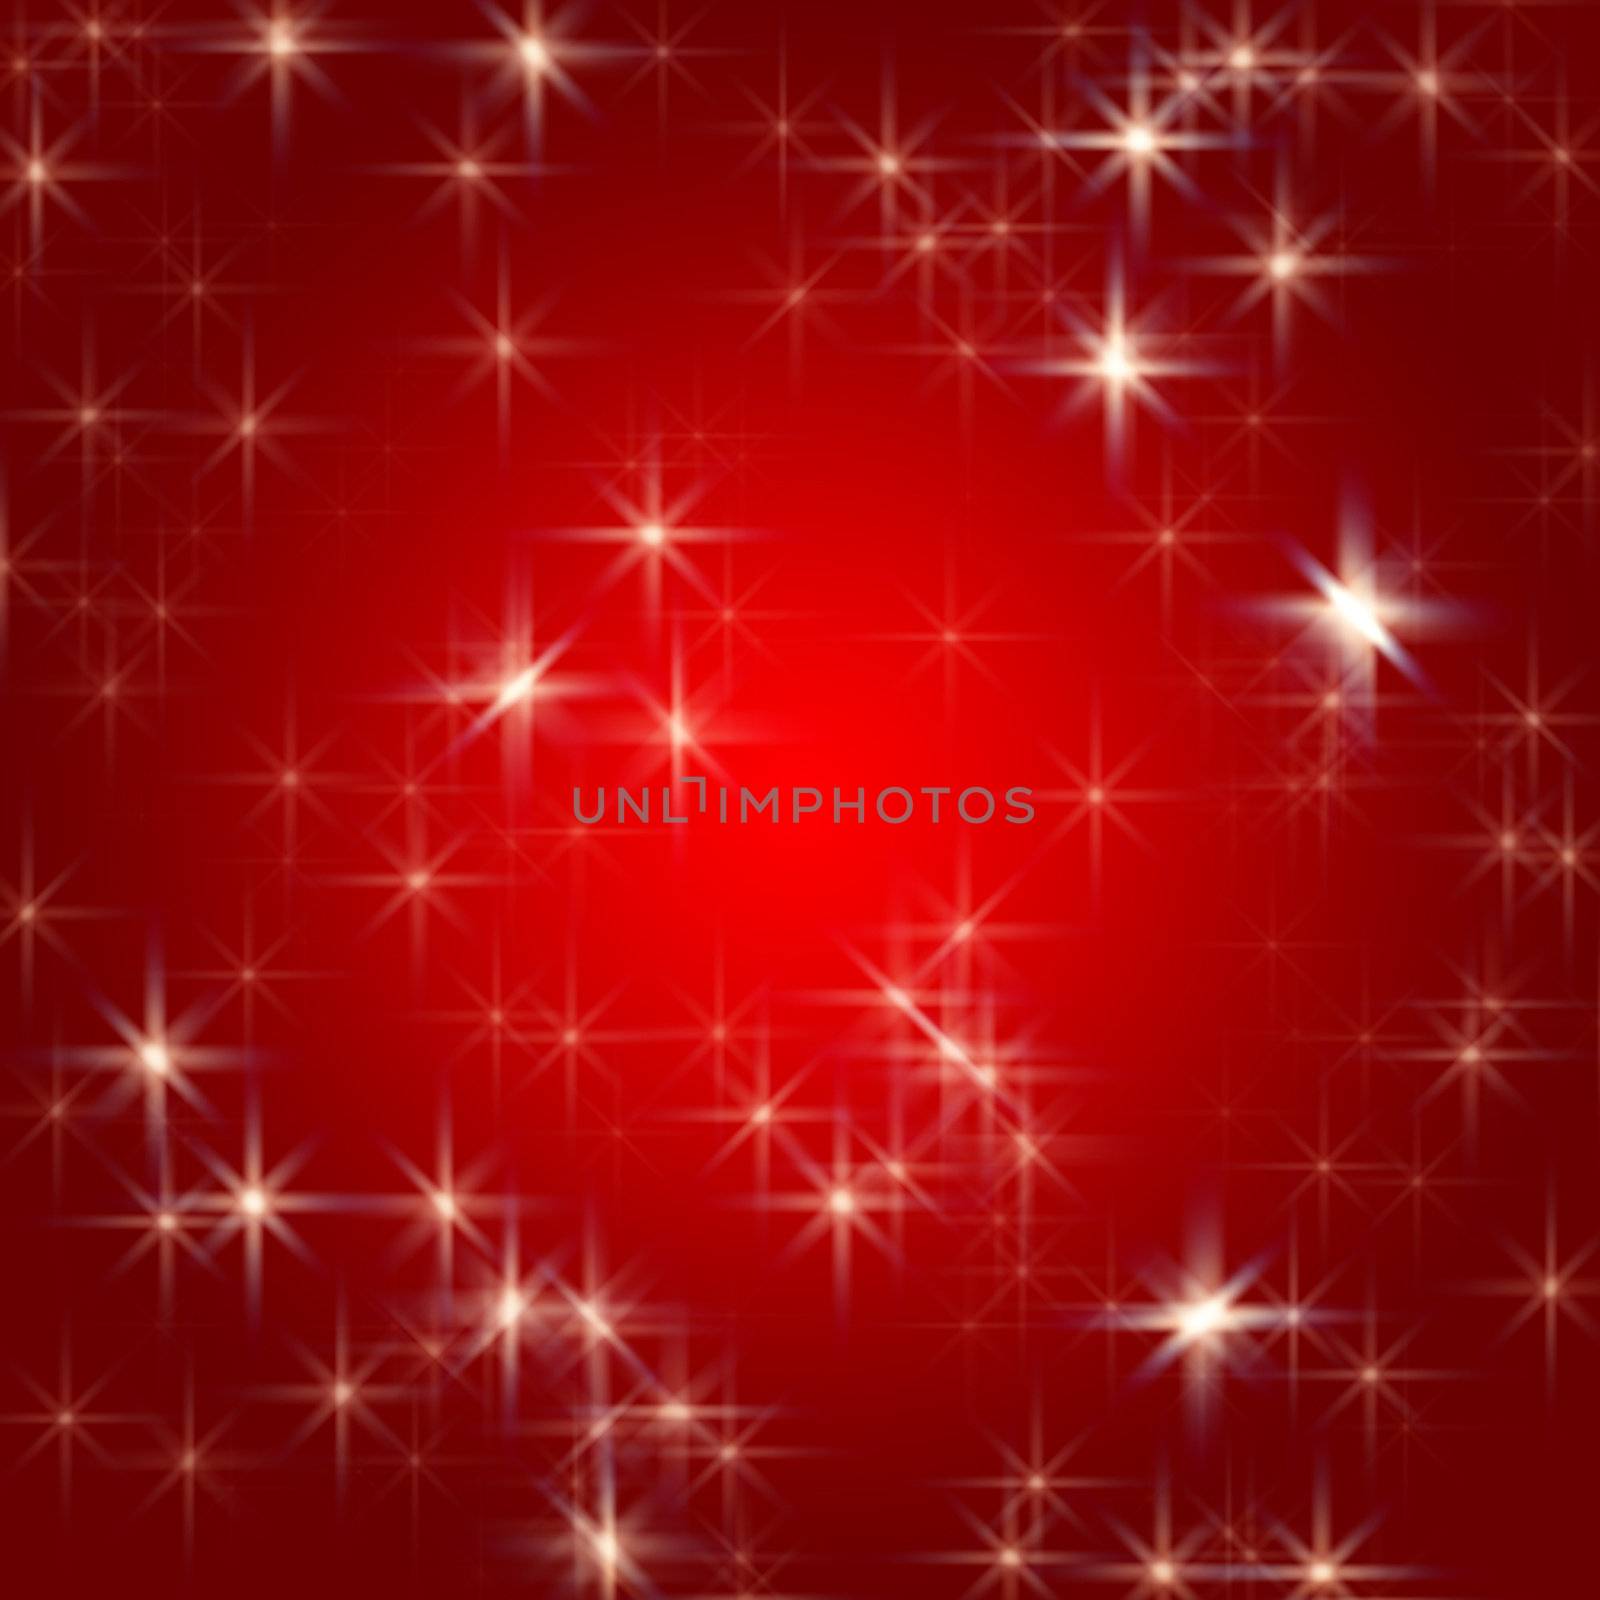 white stars over red background with feather center
